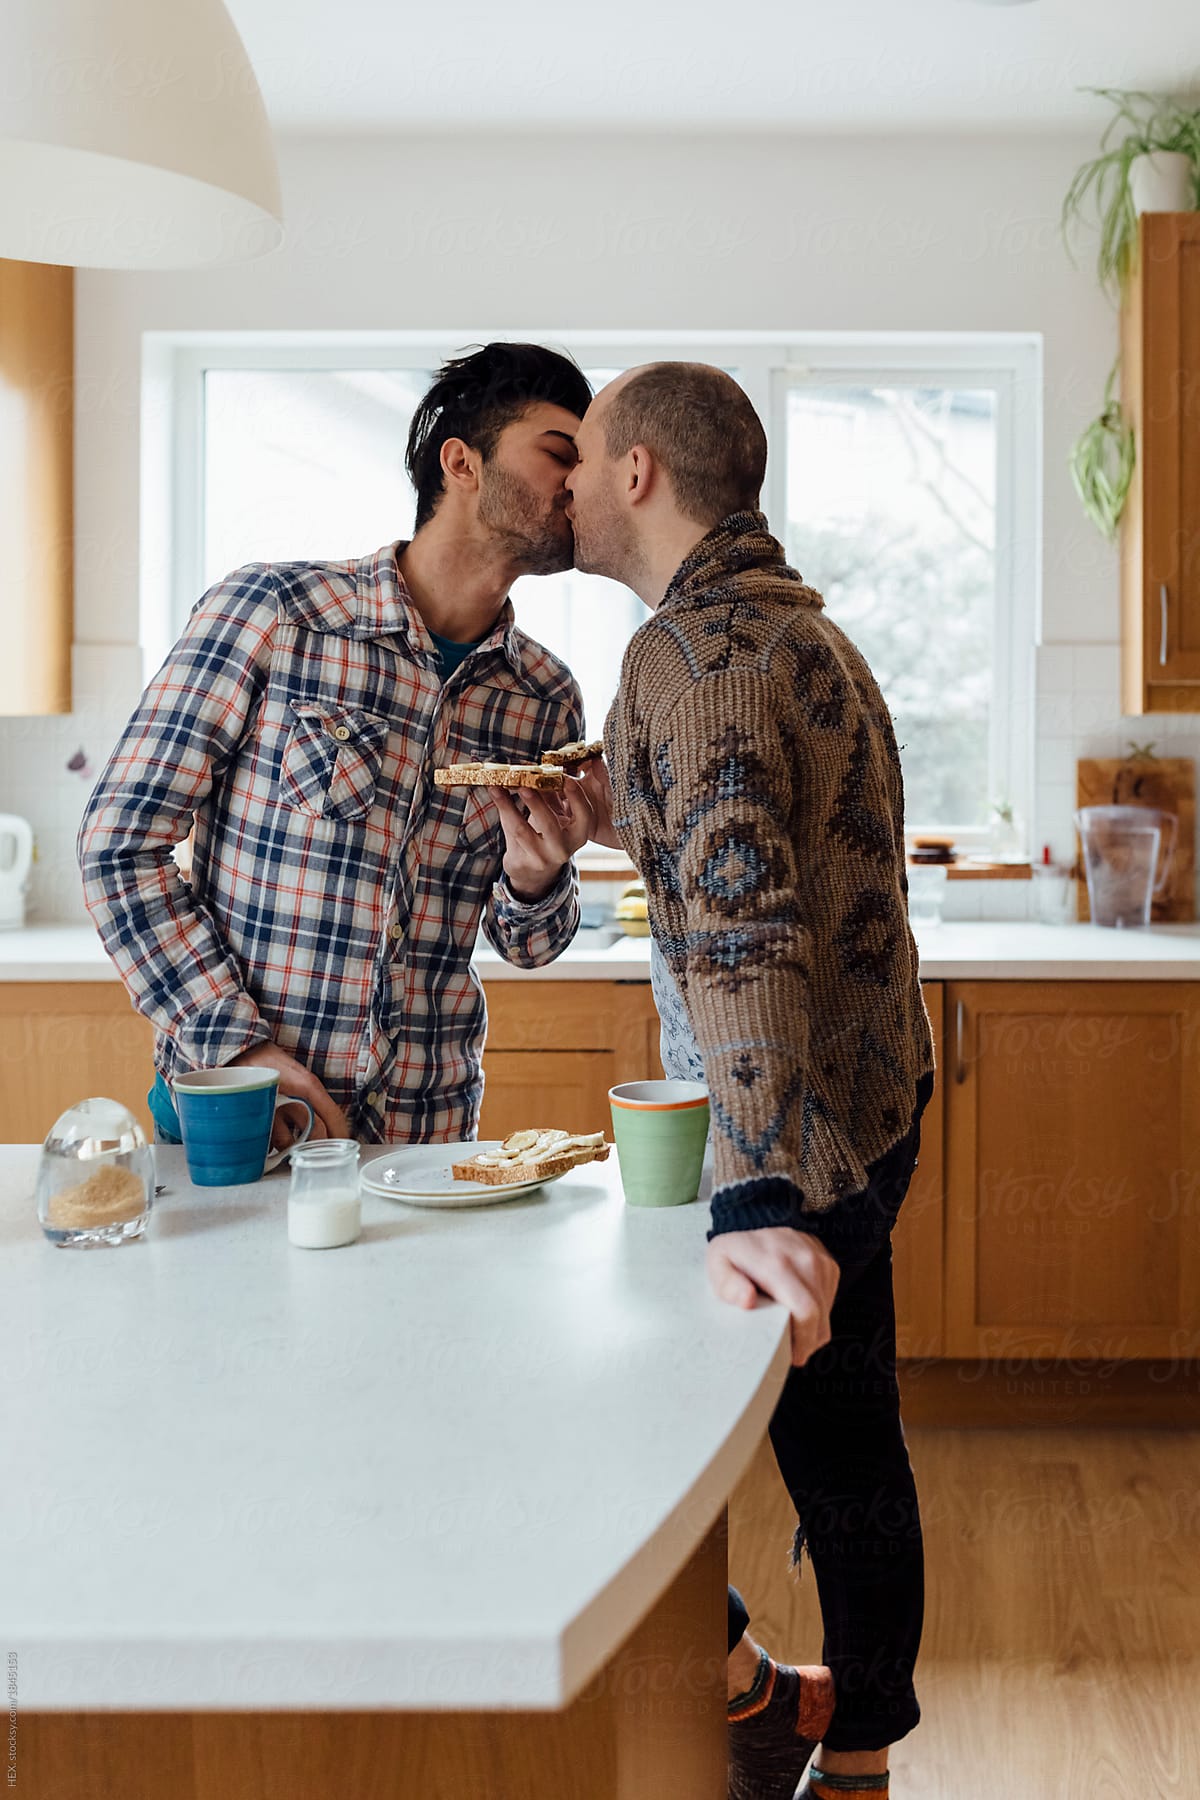 Male Gay Couple Preparing And Having Breakfast Together By Stocksy Contributor Mattia Stocksy